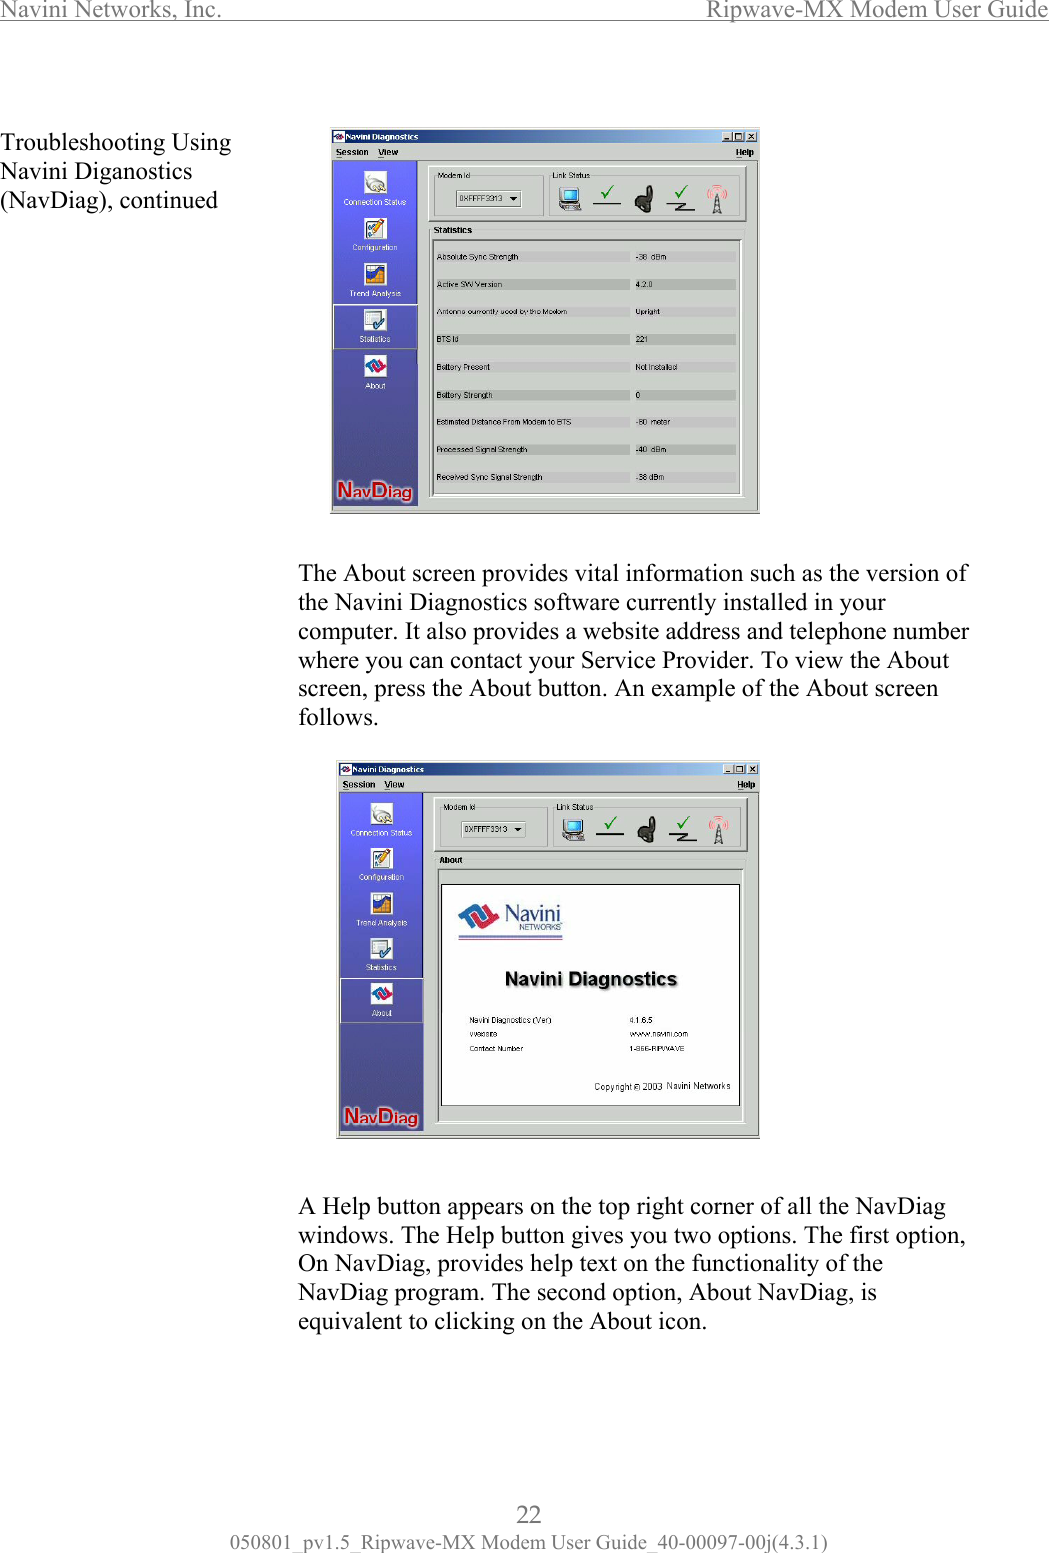 Navini Networks, Inc.                  Ripwave-MX Modem User Guide  Troubleshooting Using Navini Diganostics (NavDiag), continued                                                           The About screen provides vital information such as the version of r tton. An example of the About screen llows.  Help button appears on the top right corner of all the NavDiag indows. The Help button gives you two options. The first option, n NavDiag, provides help text on the functionality of the avDiag program. The second option, About NavDiag, is quivalent to clicking on the About icon.  the Navini Diagnostics software currently installed in your computer. It also provides a website address and telephone numbewhere you can contact your Service Provider. To view the About screen, press the About bufo                AwONe 22 050801_pv1.5_Ripwave-MX Modem User Guide_40-00097-00j(4.3.1) 